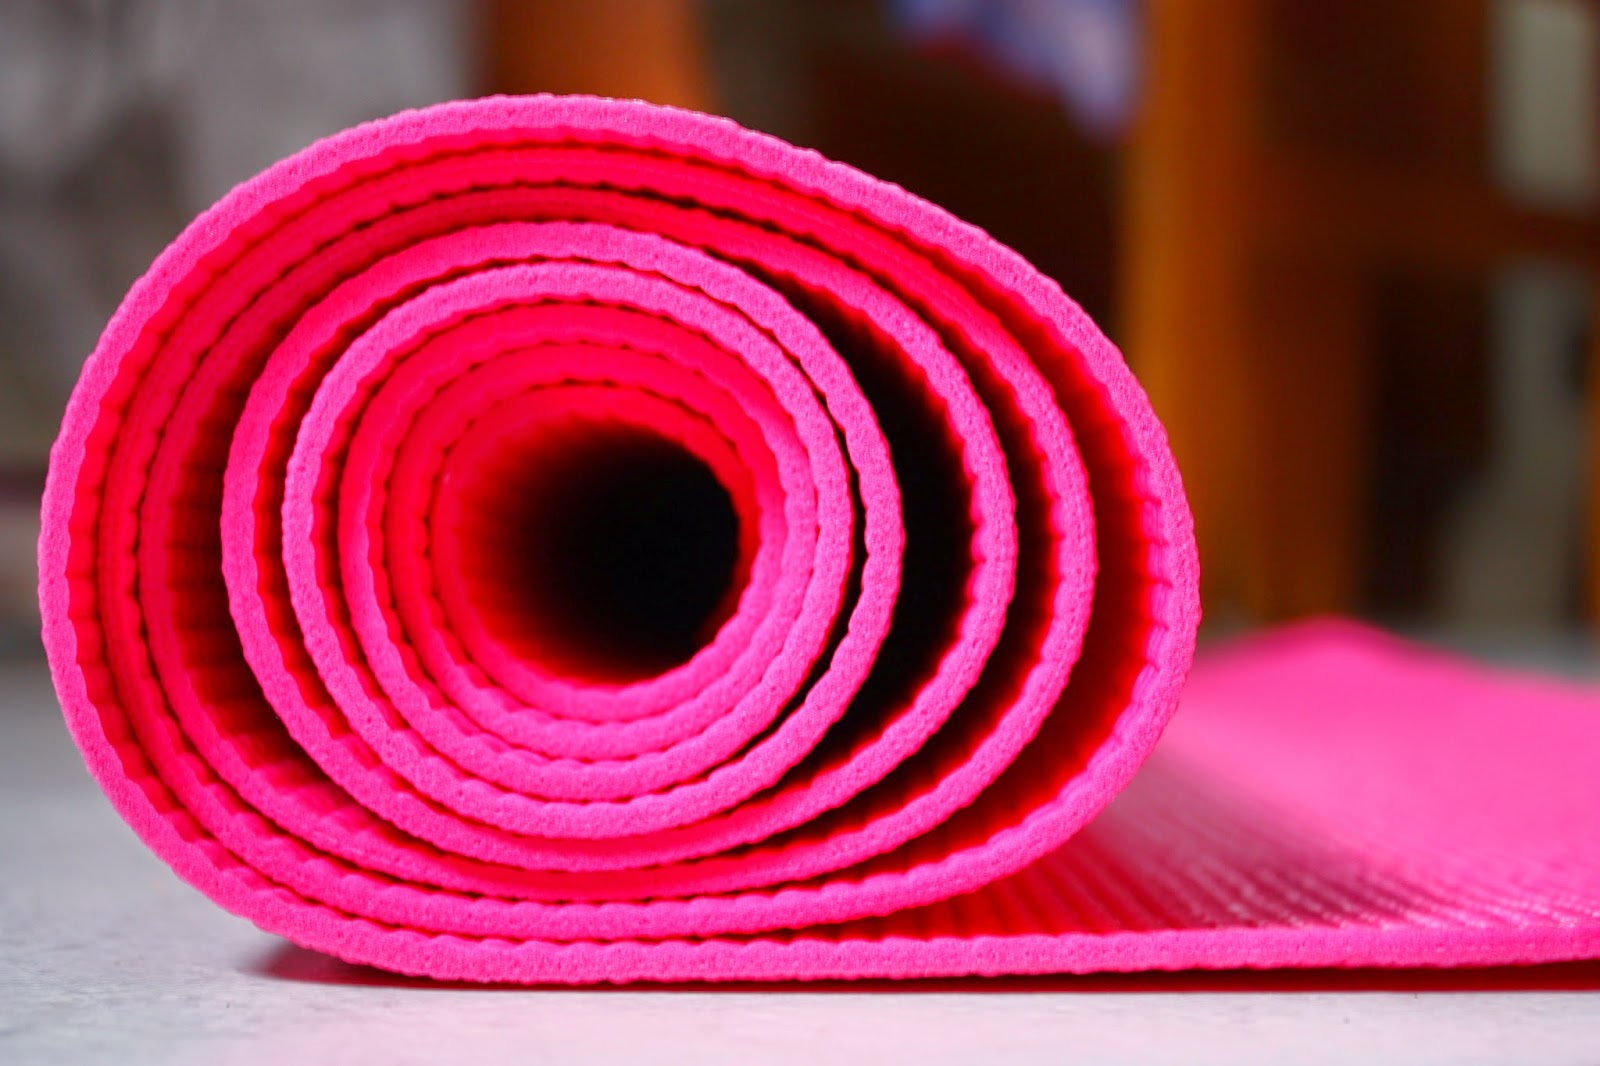 How To Clean Your Yoga Equipment Between Classes